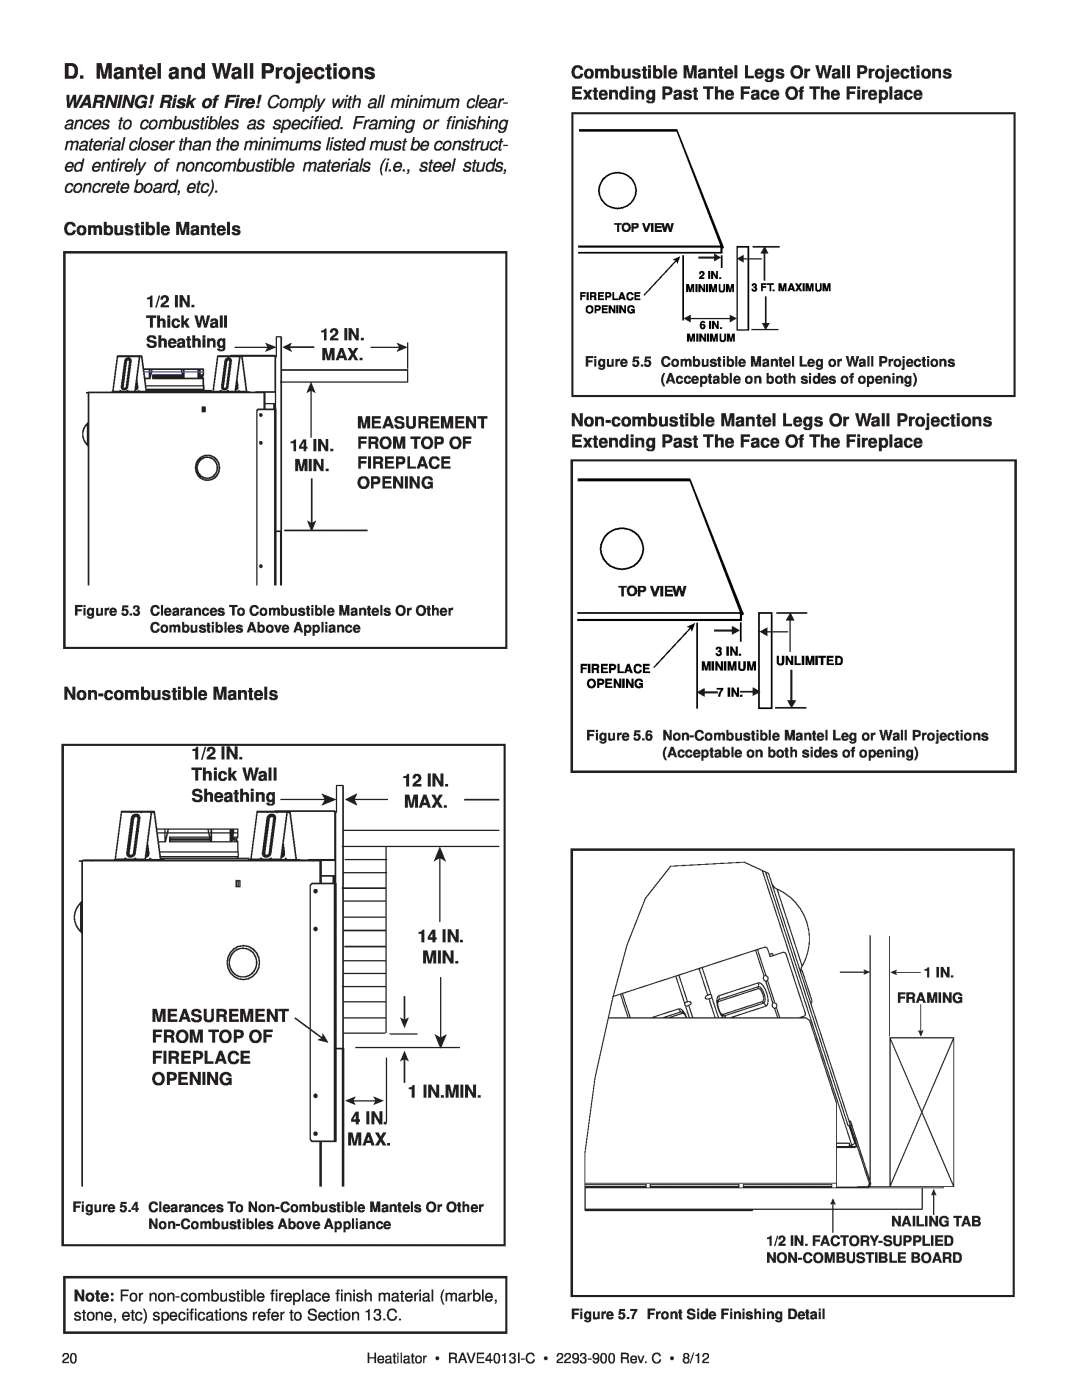 Heatiator Rave4013i-c owner manual D. Mantel and Wall Projections 